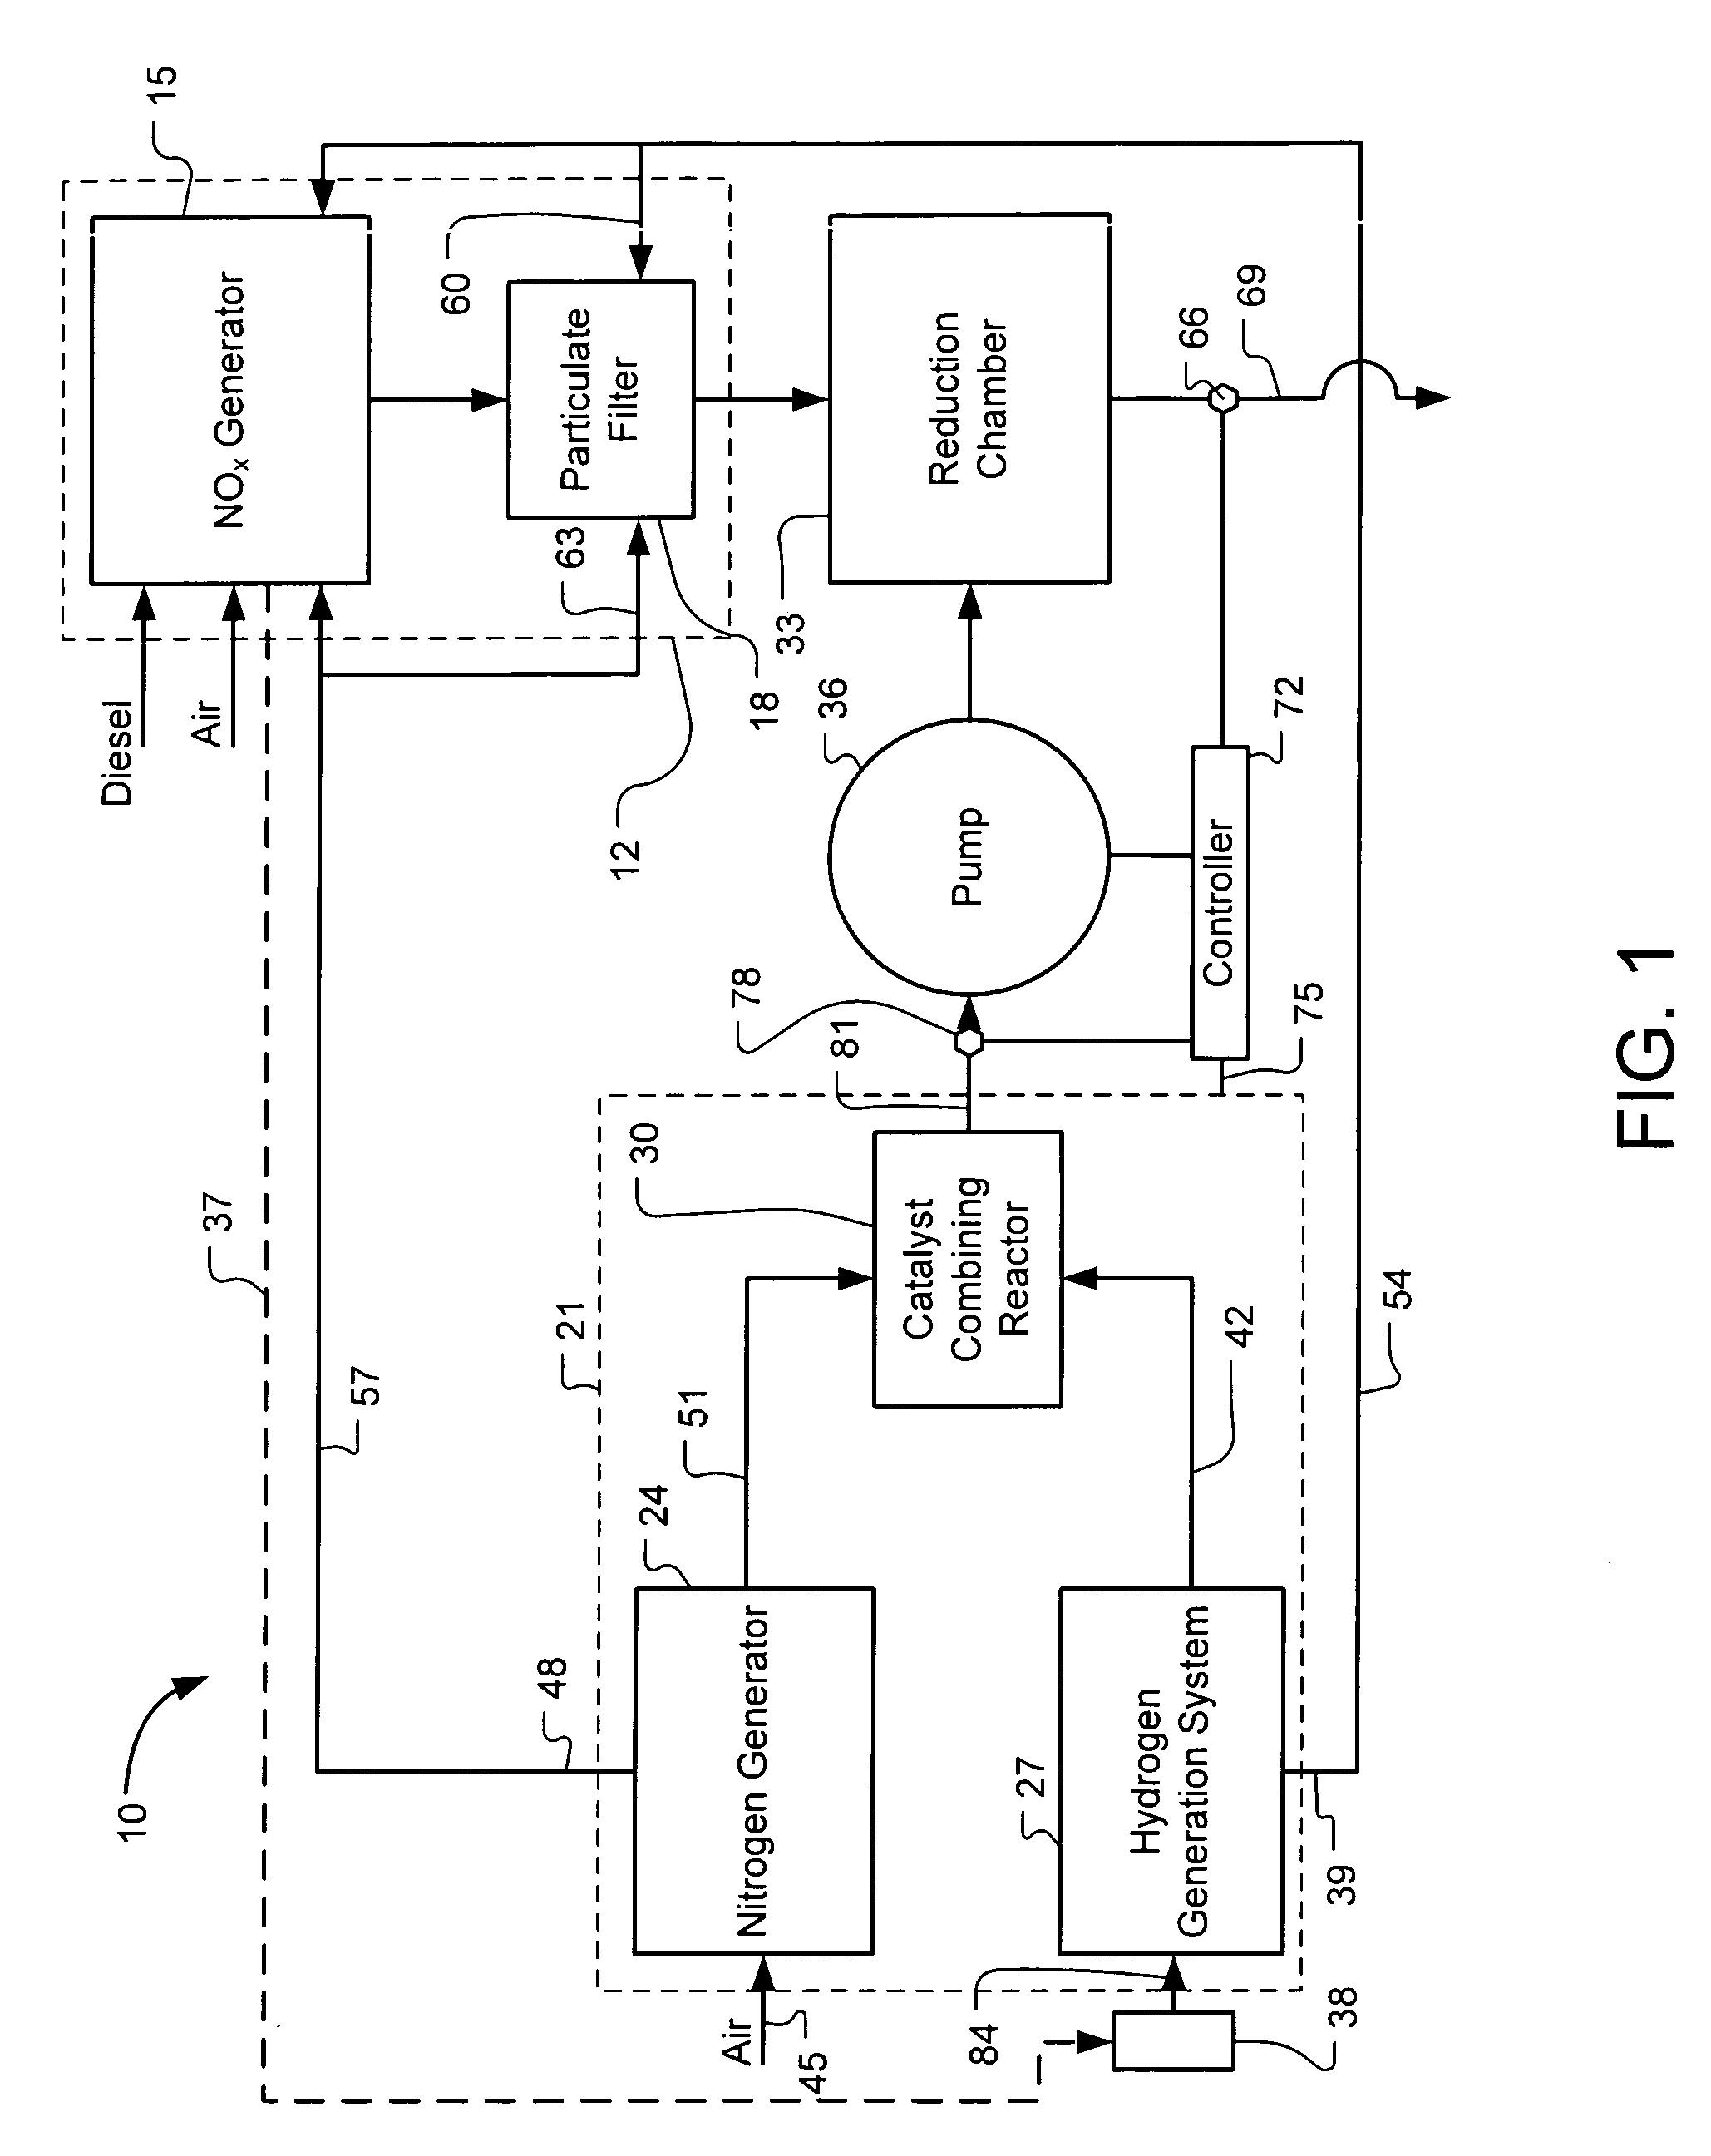 Systems and Methods for On-Site Selective Catalytic Reduction